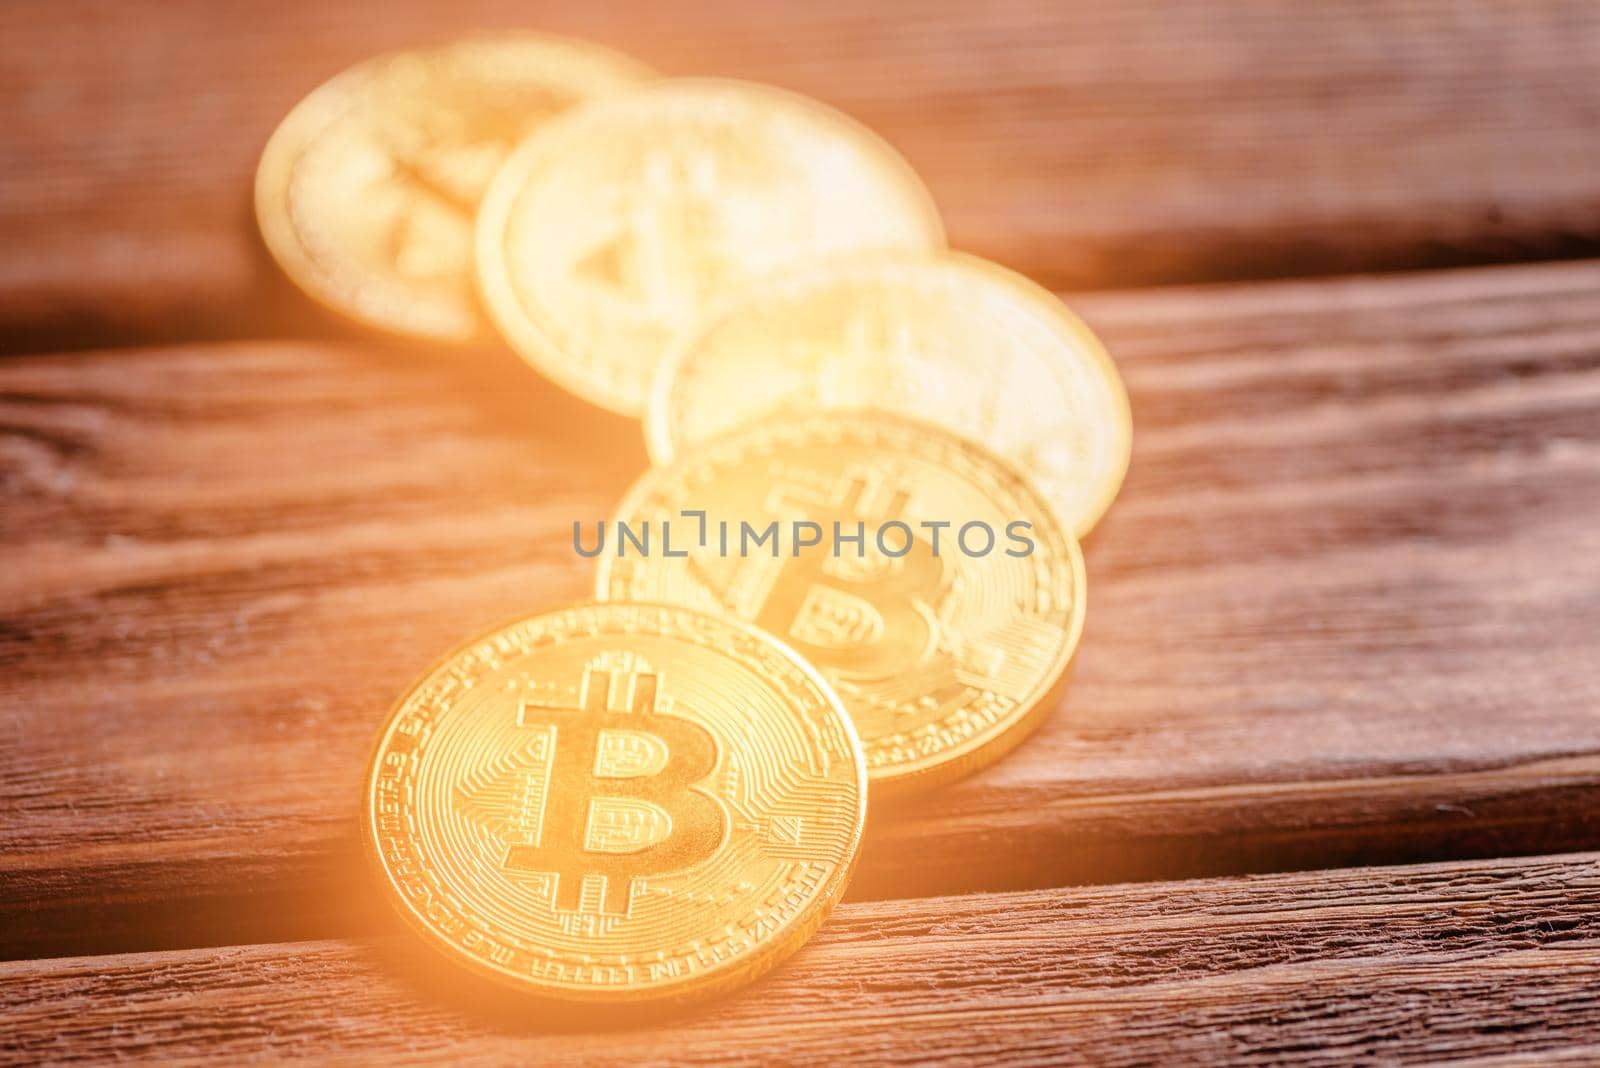 Many glowing gold bitcoins on a wooden table, close-up. Symbol of crypto currency and virtual money.